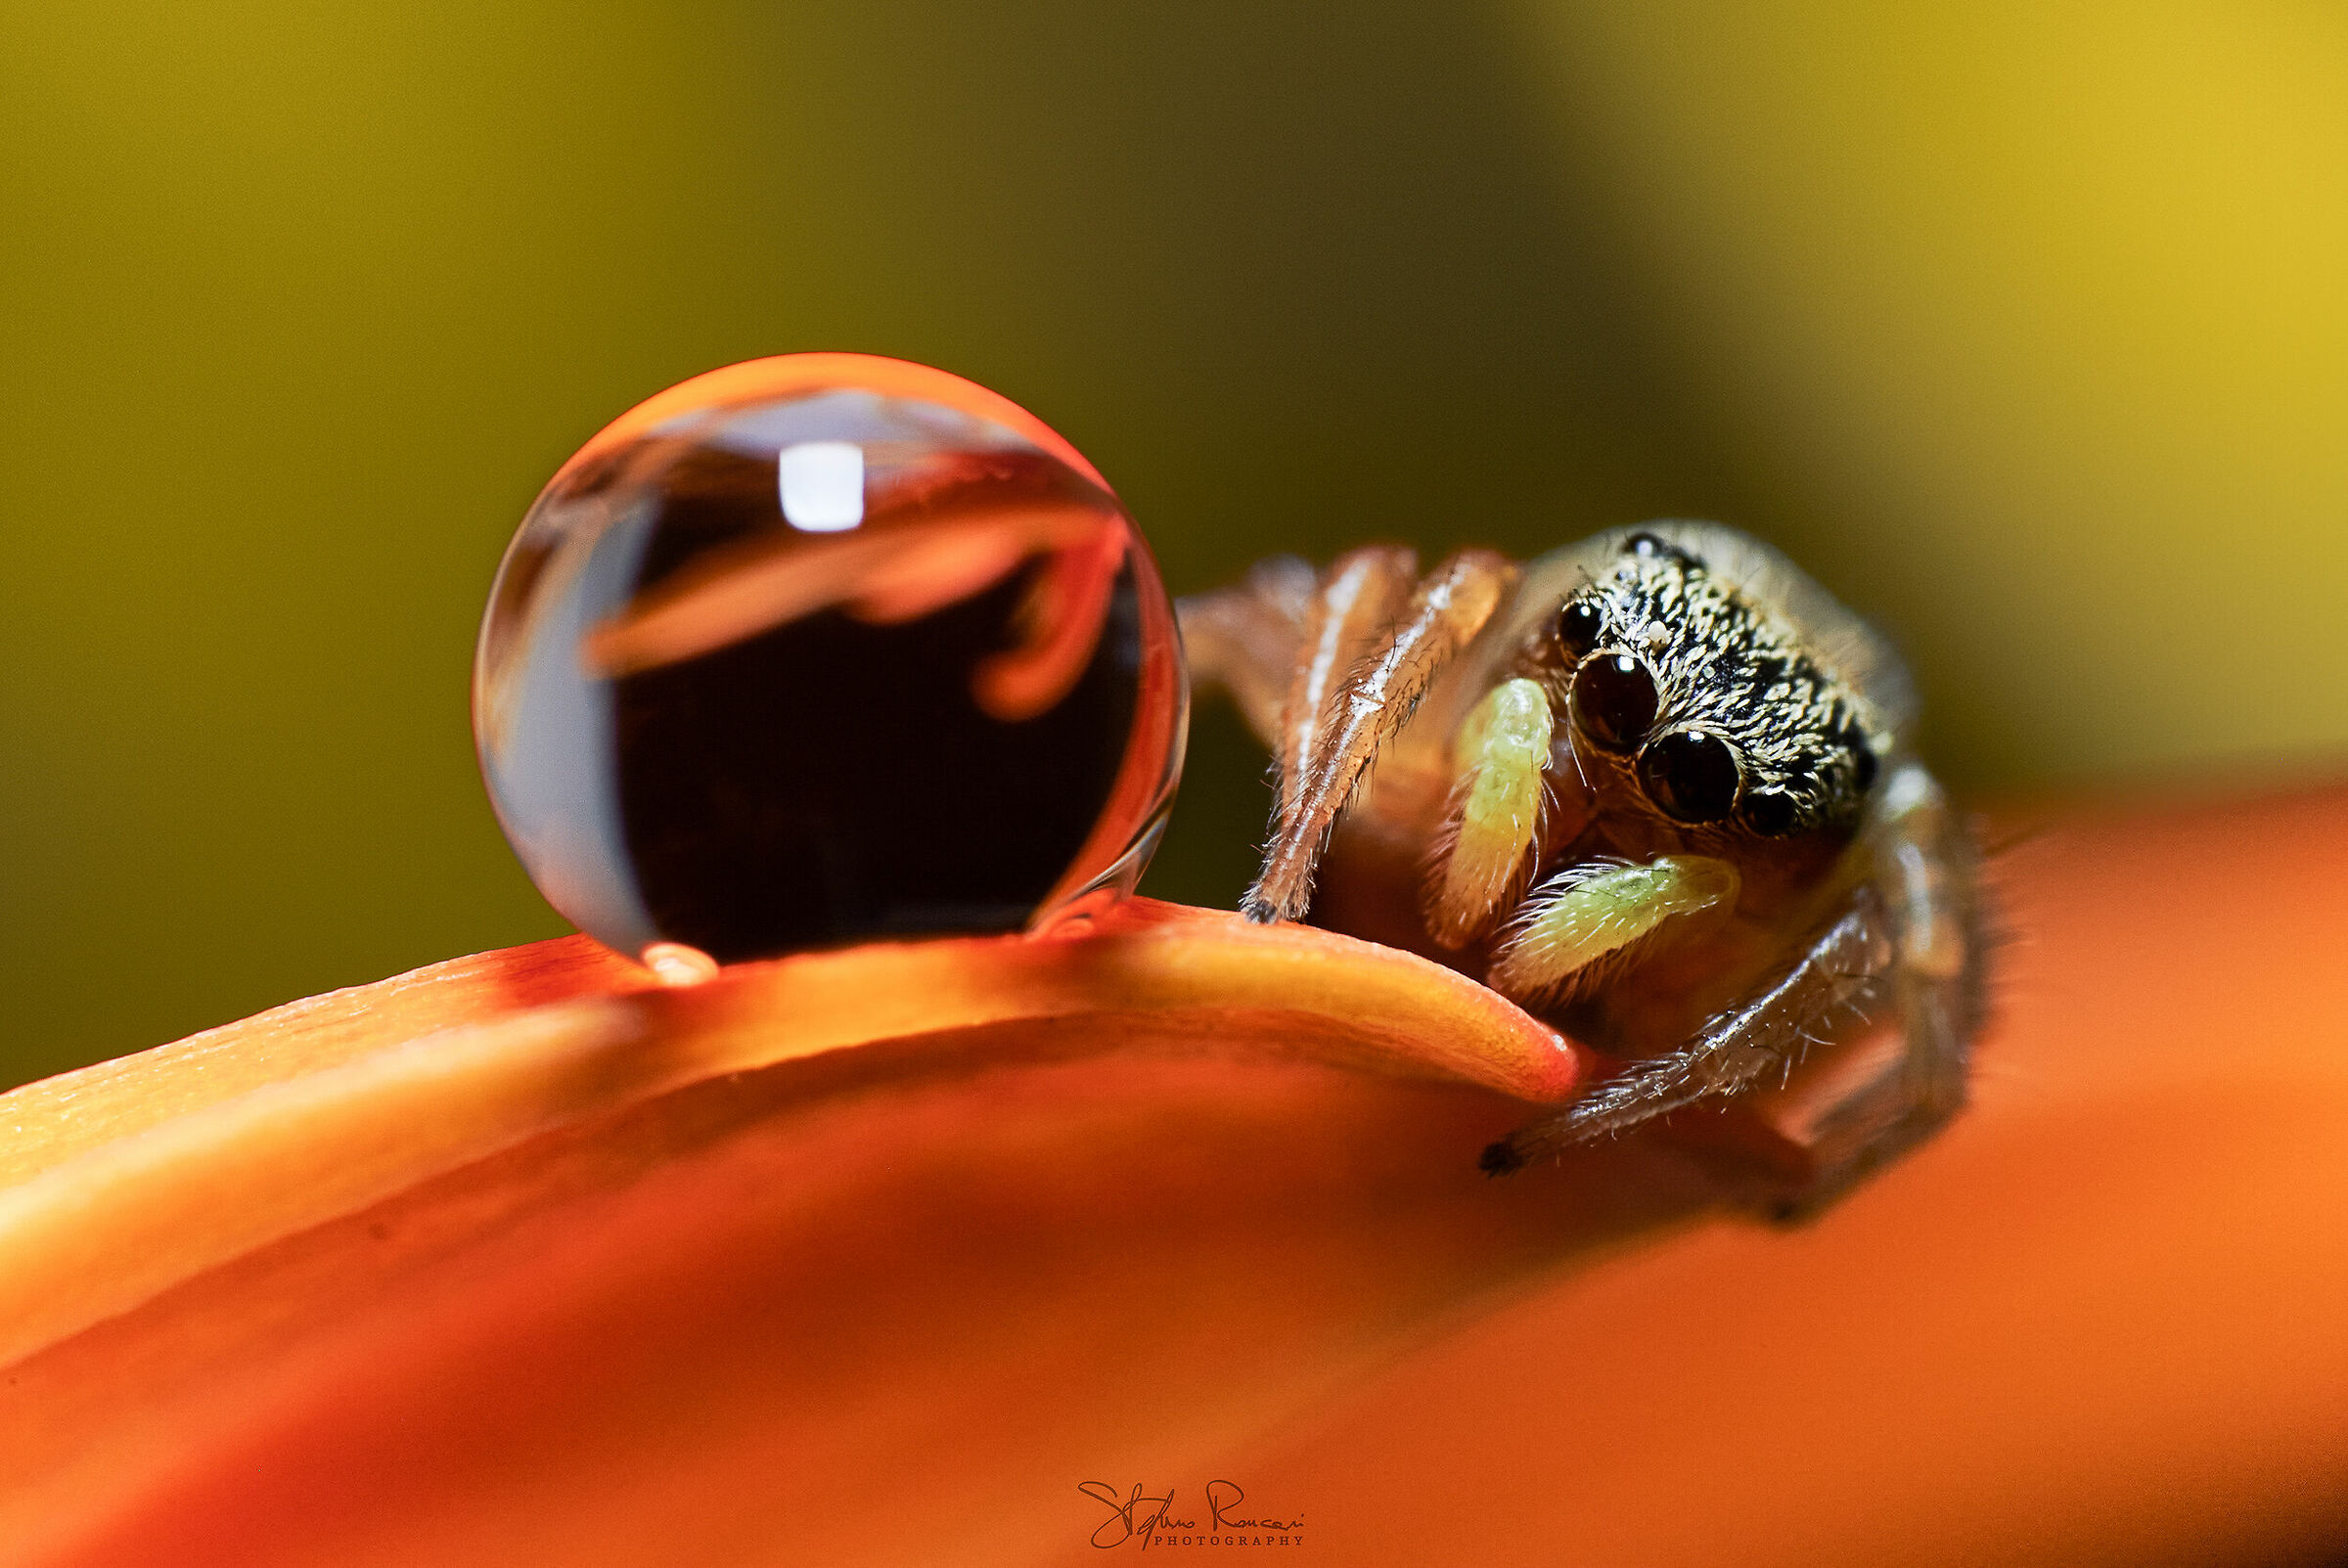 The Curiosity of the Spider...